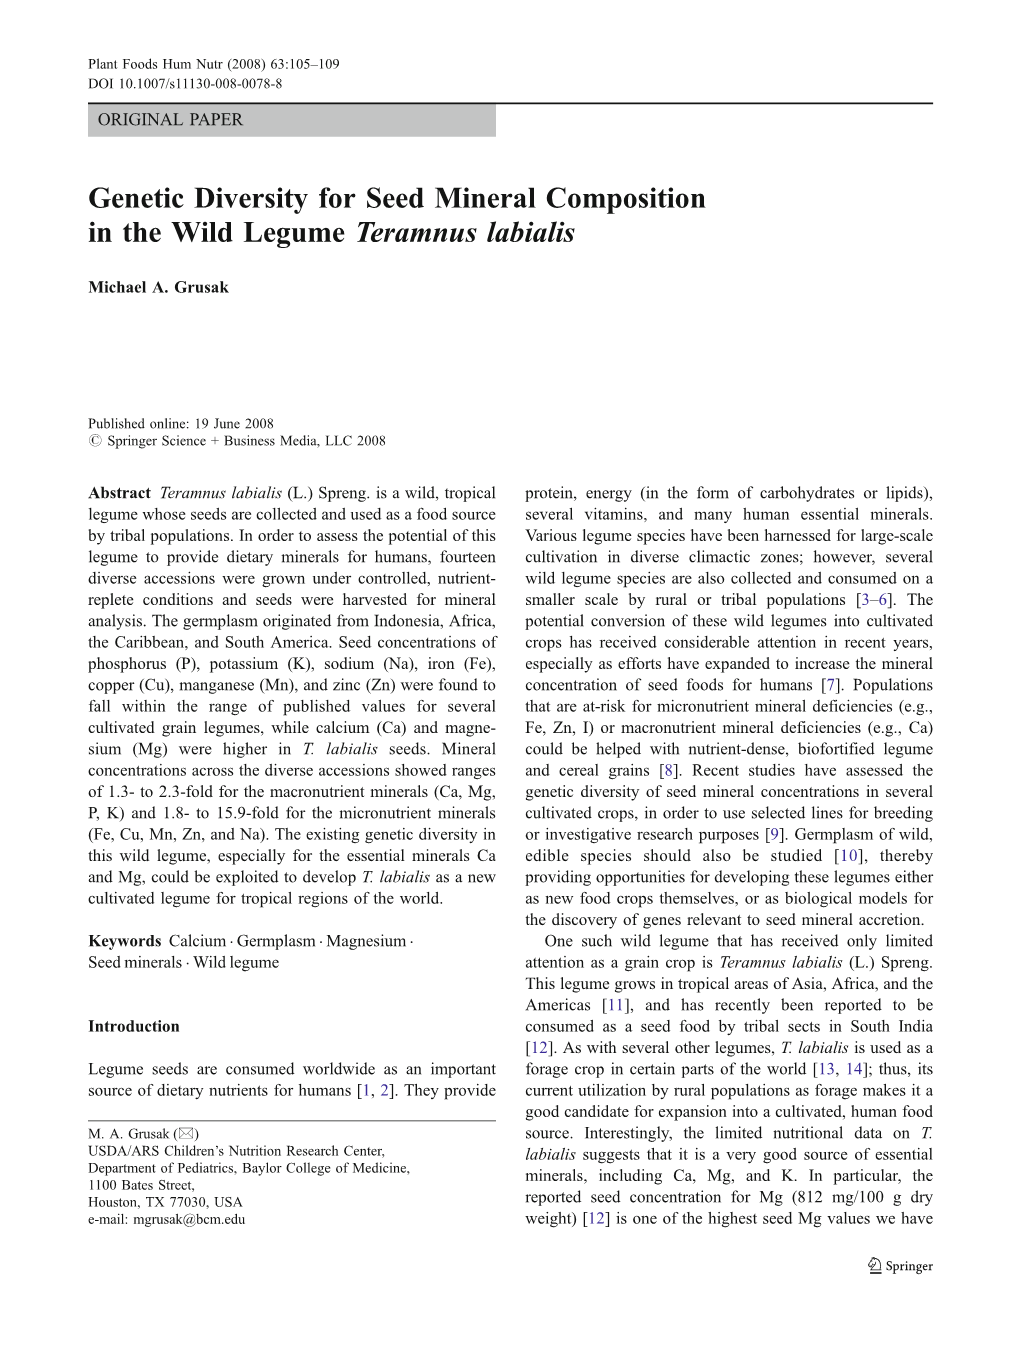 Genetic Diversity for Seed Mineral Composition in the Wild Legume Teramnus Labialis